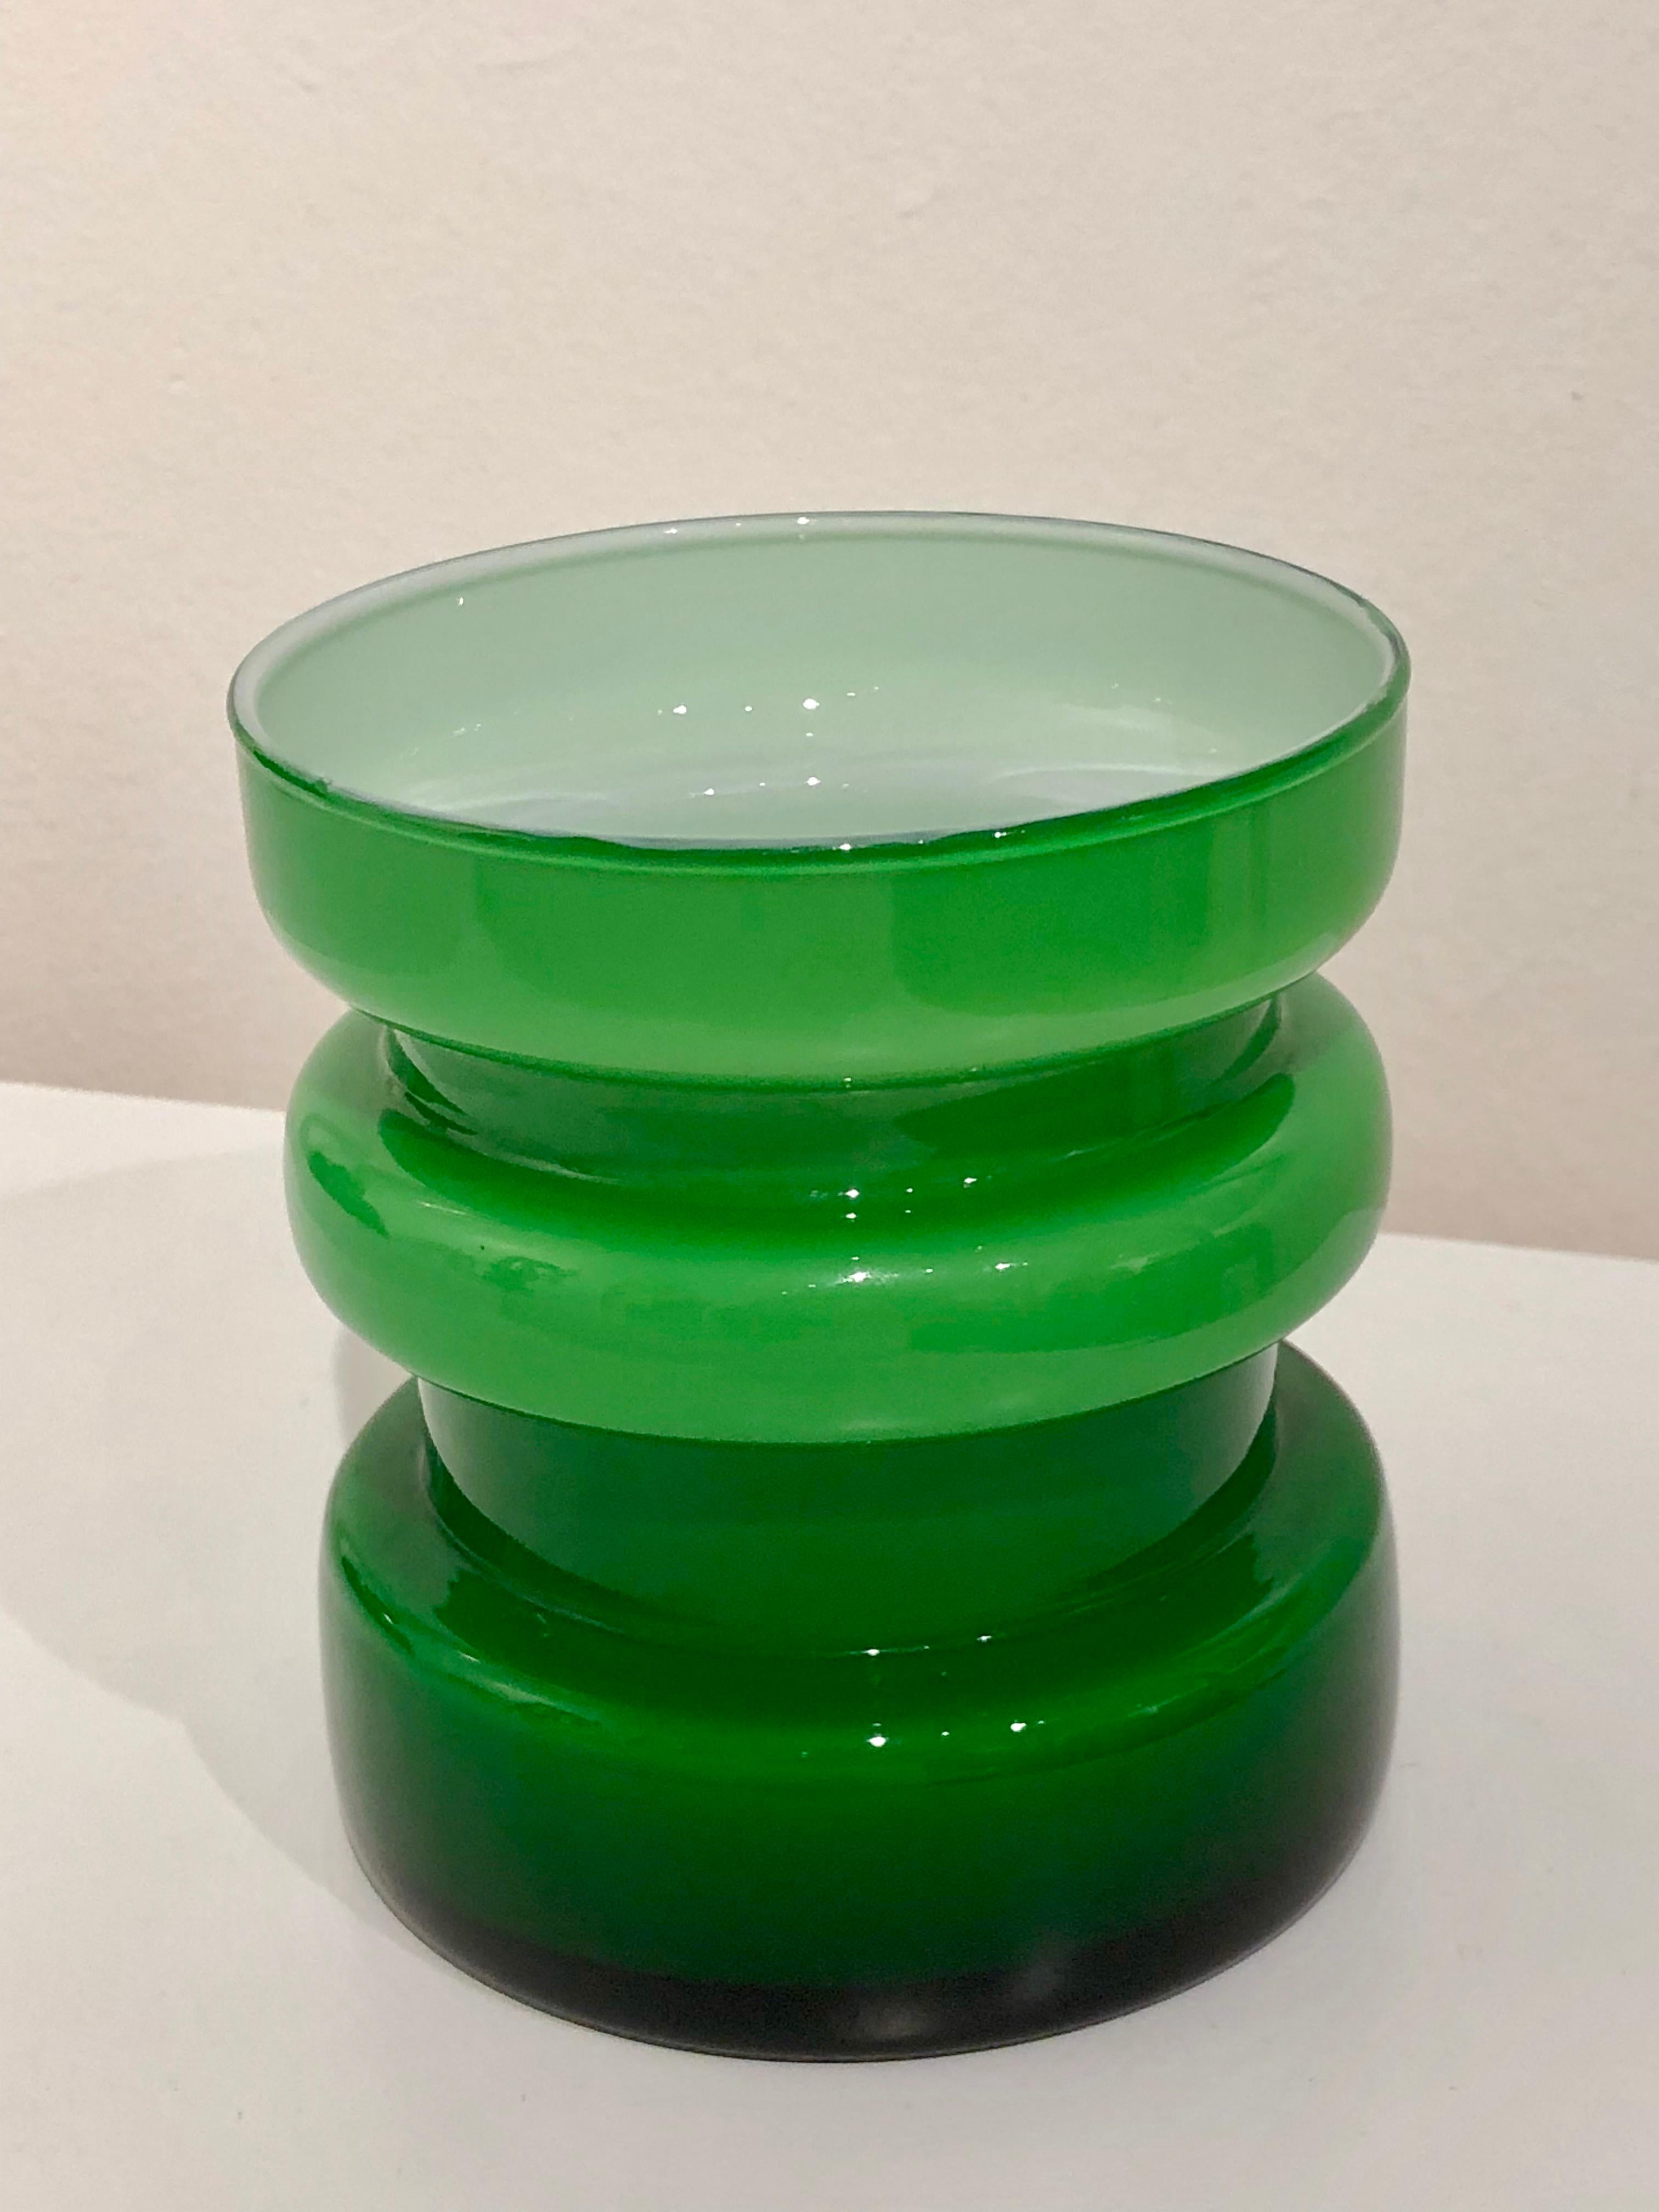 Iconic Danish modern handblown Art Glass small vase that will be a gorgeous pop of color in your decor. Designed by Otto Brauer for Holmegaard in excellent condition with no chips, cracks or scratches.